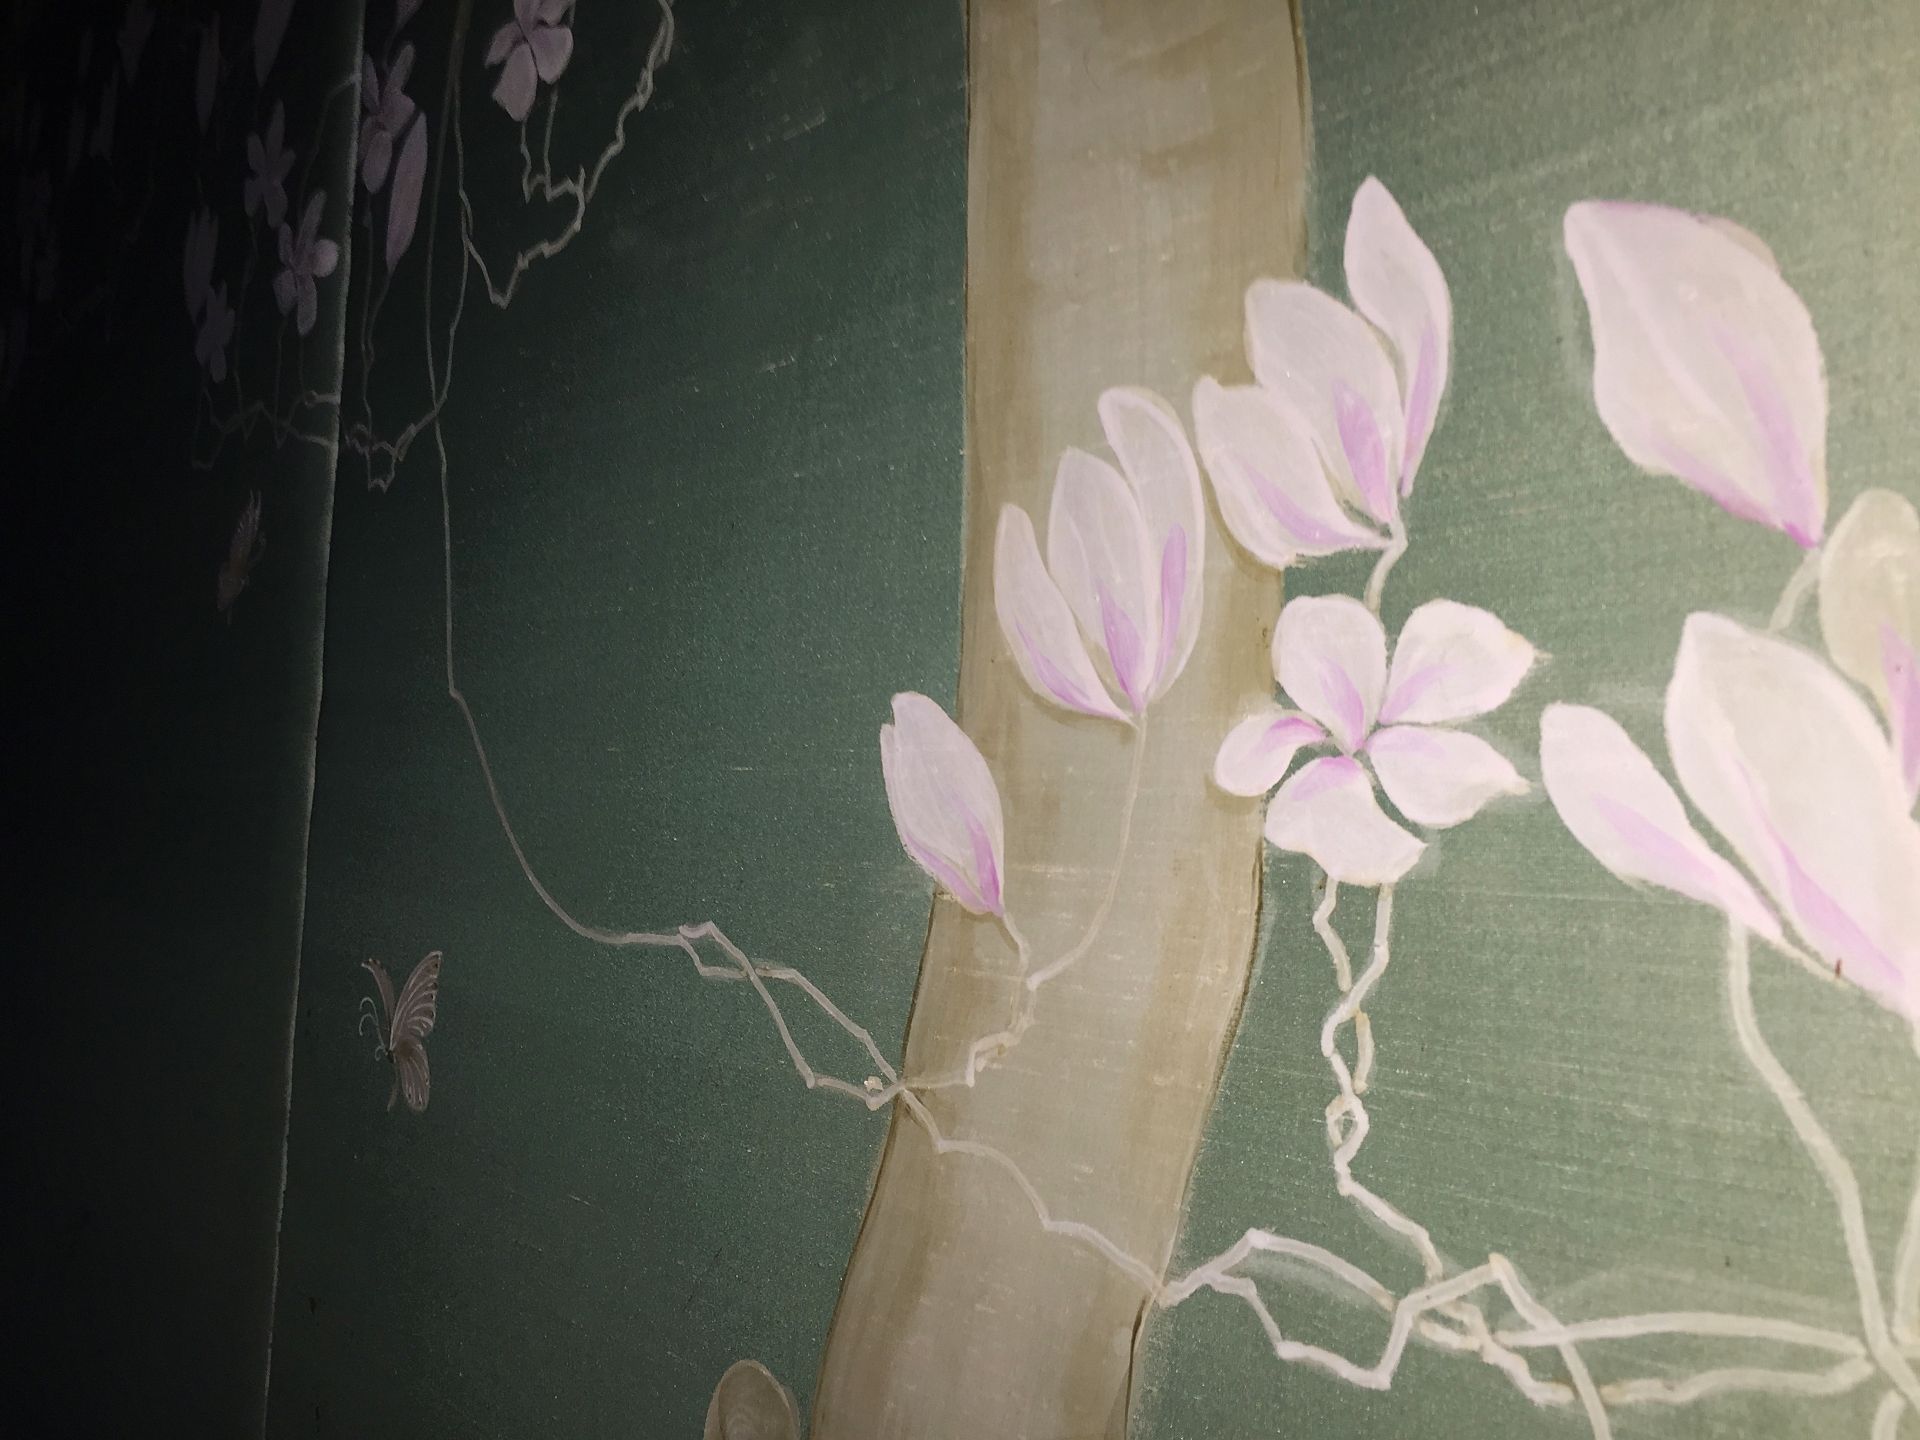 6 x Padded Silk Oriental Themed Wall Panels in deep Pale Green colour with tree theme - Ref: sb030 - - Image 4 of 5